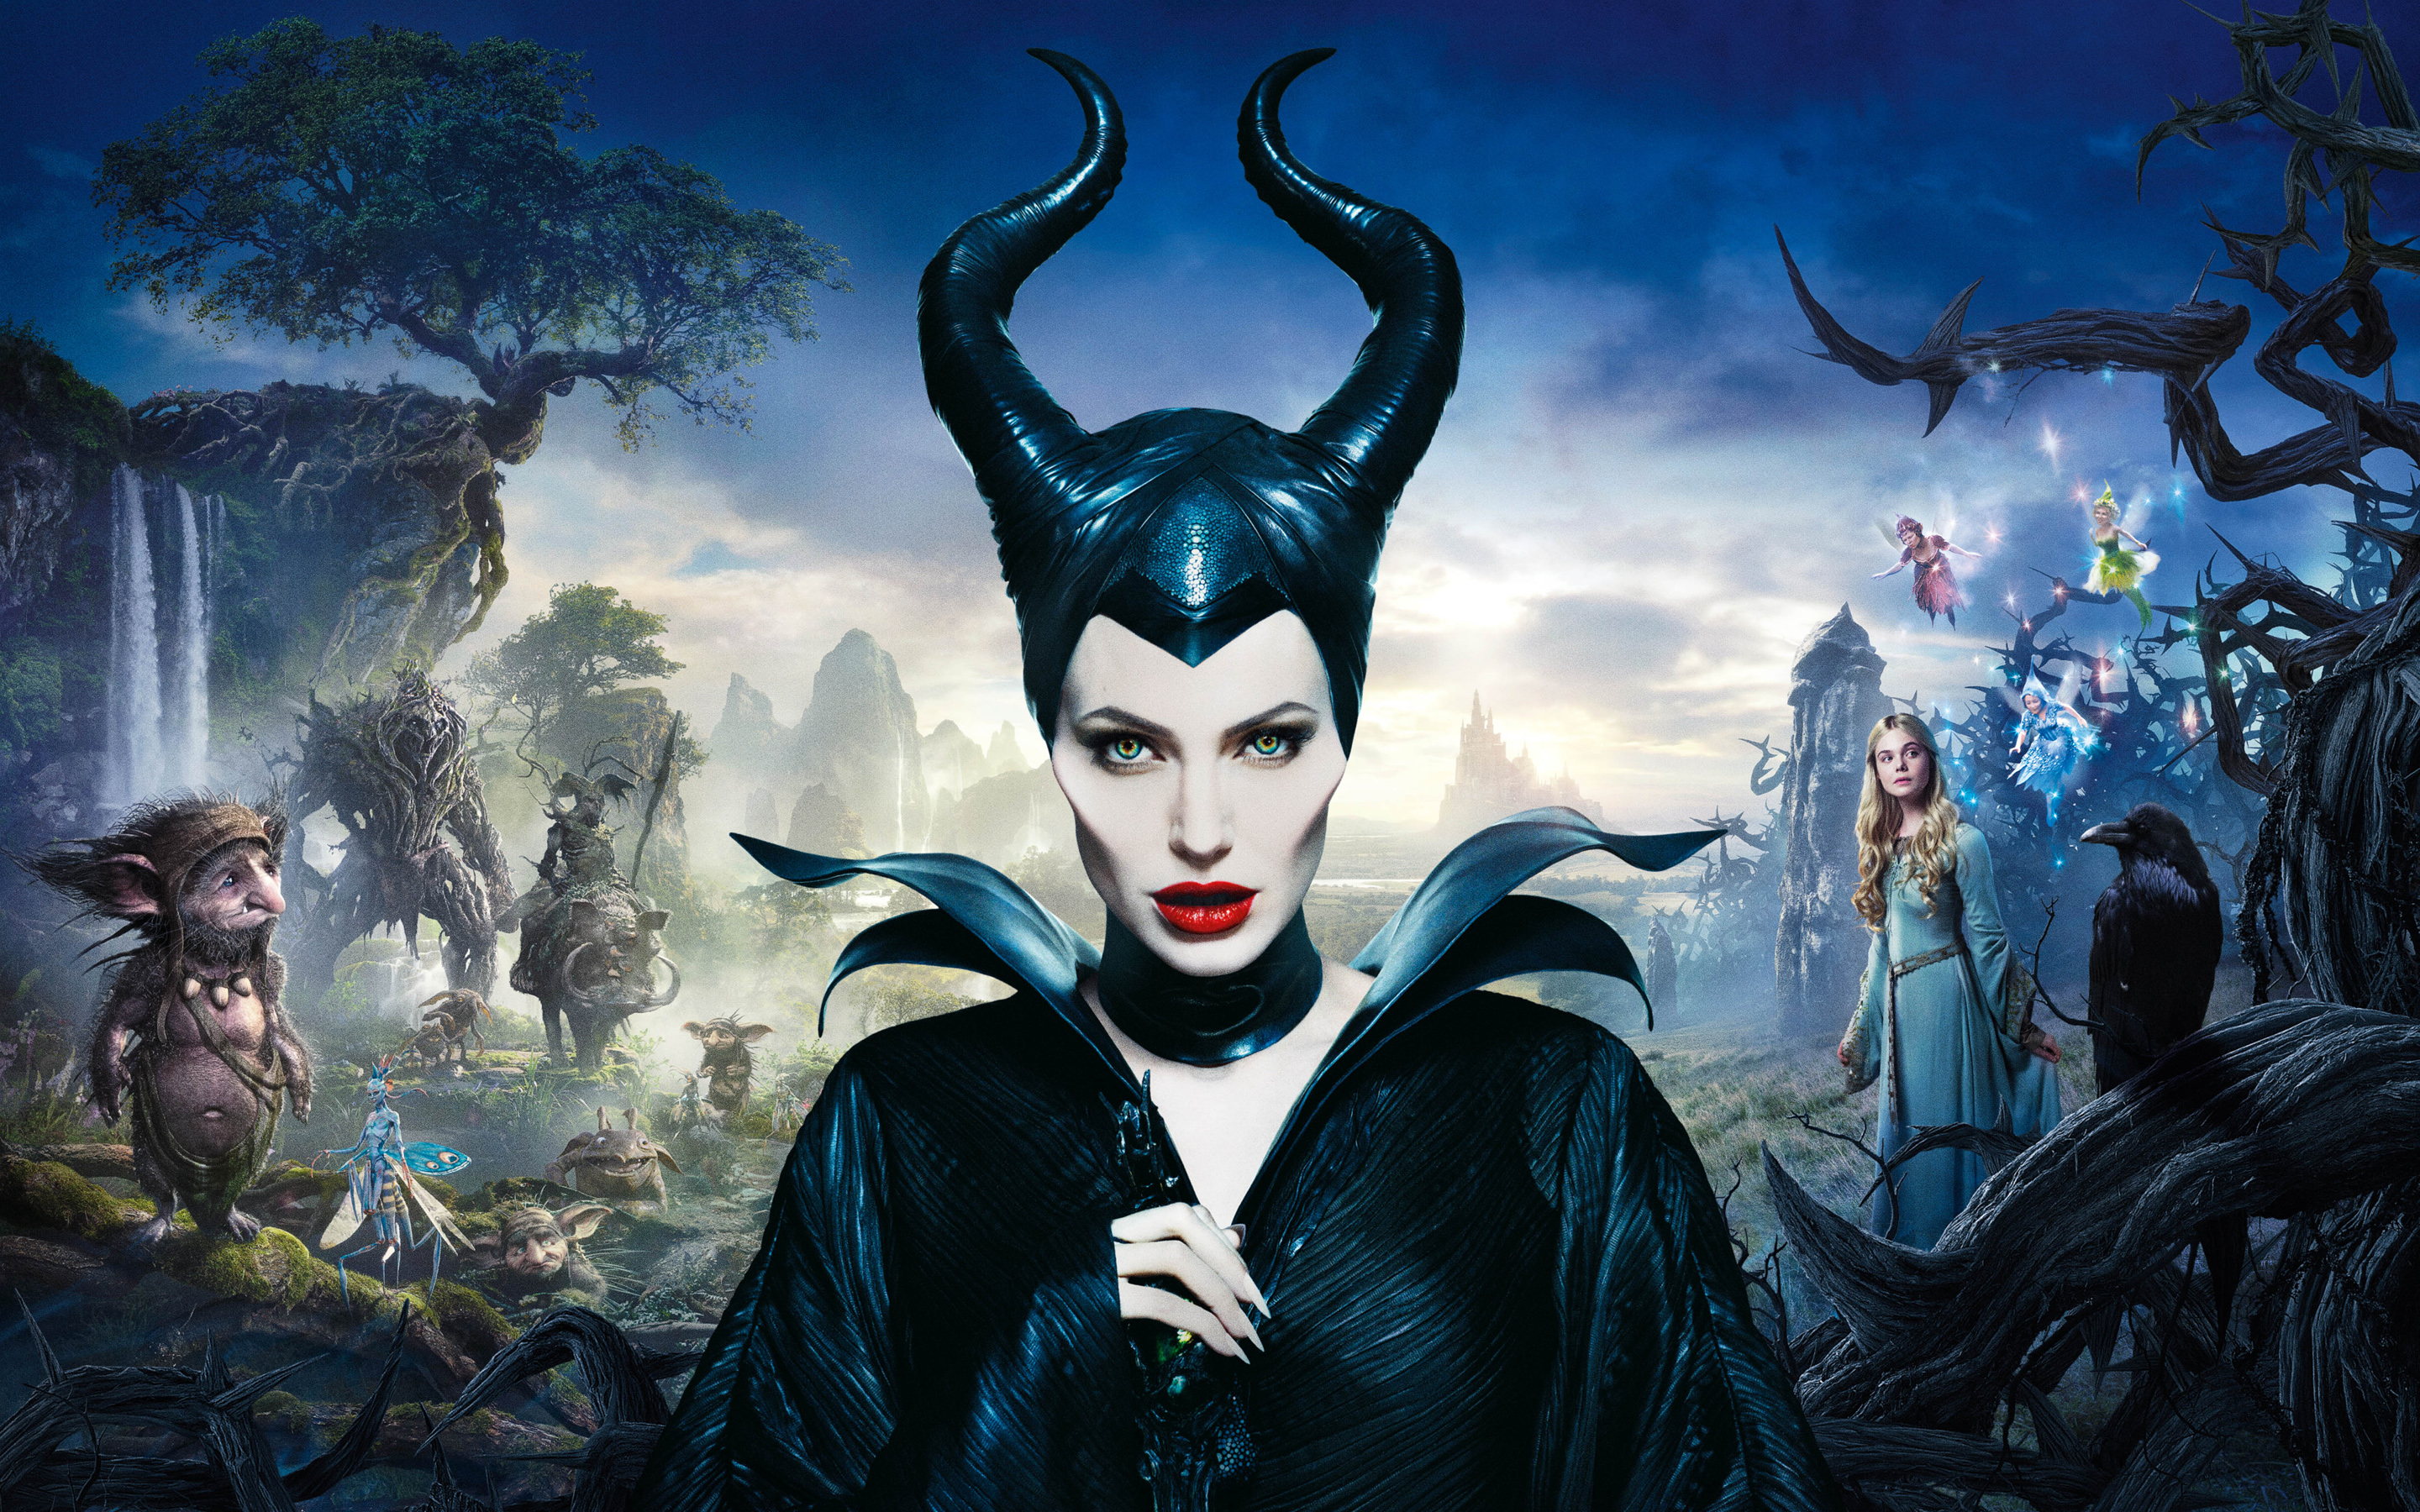 Sleeping Beauty Vs Maleficent Image HD Wallpaper And